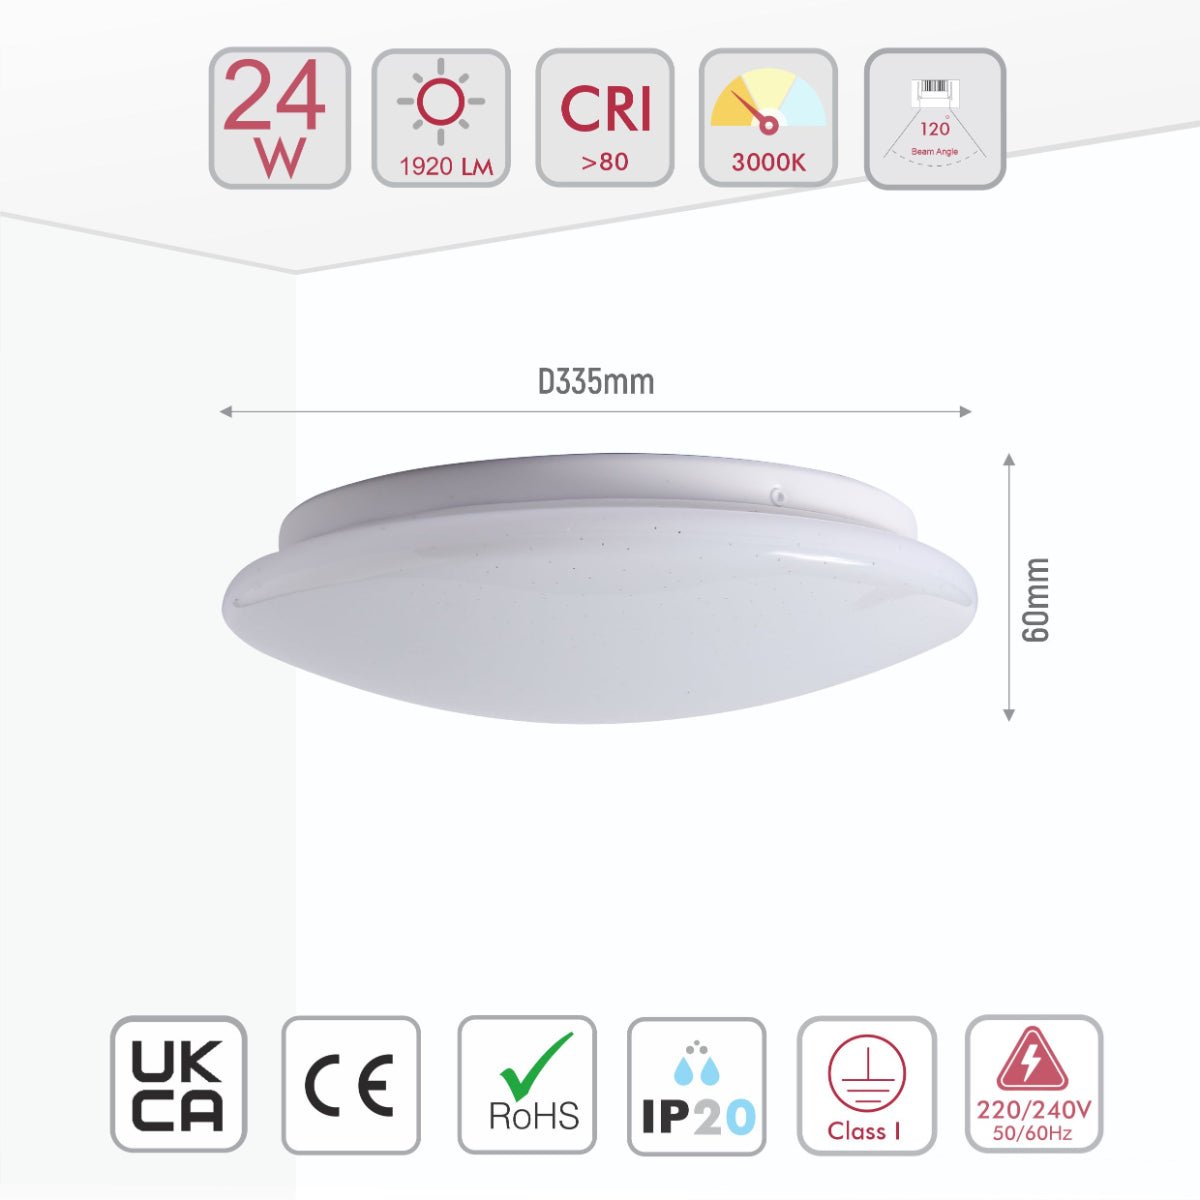 Size and specs of Moonlight Flush Ceiling Light 24W Warm White Cool White Cool Daylight 1920LM IP20 non-yellowing PMMA Cover | TEKLED 121-03992